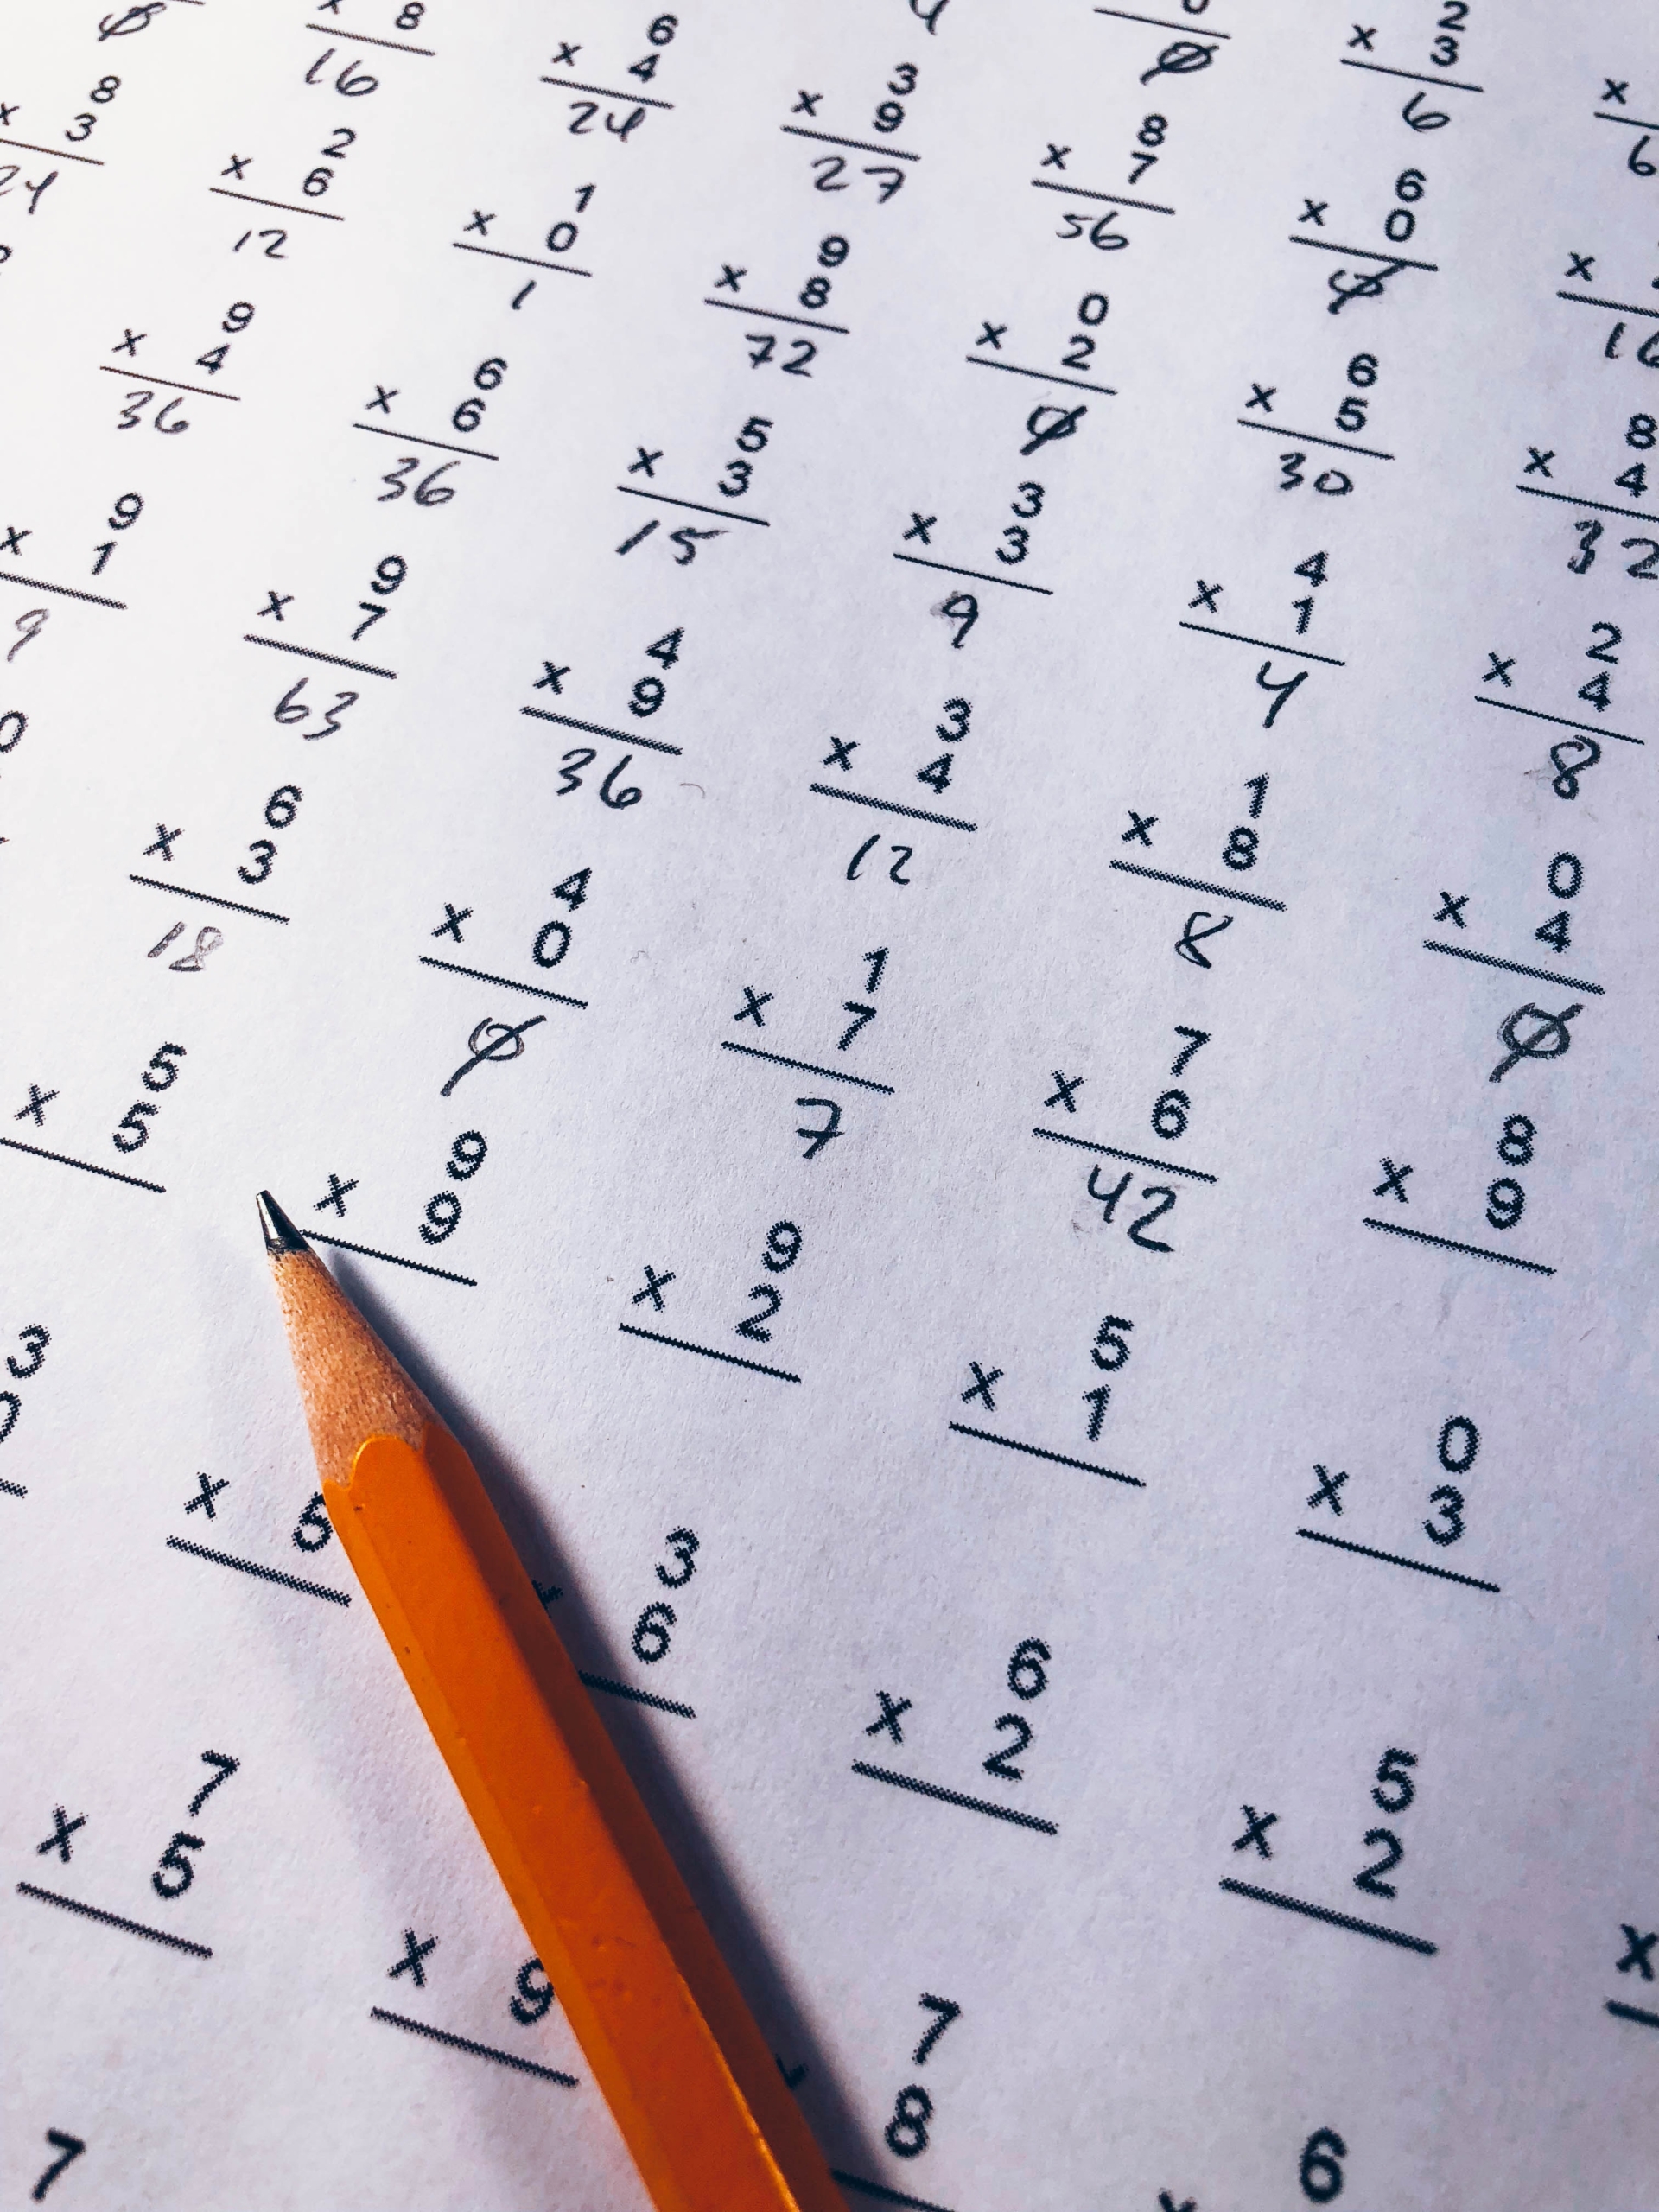 math problems on paper with pencil